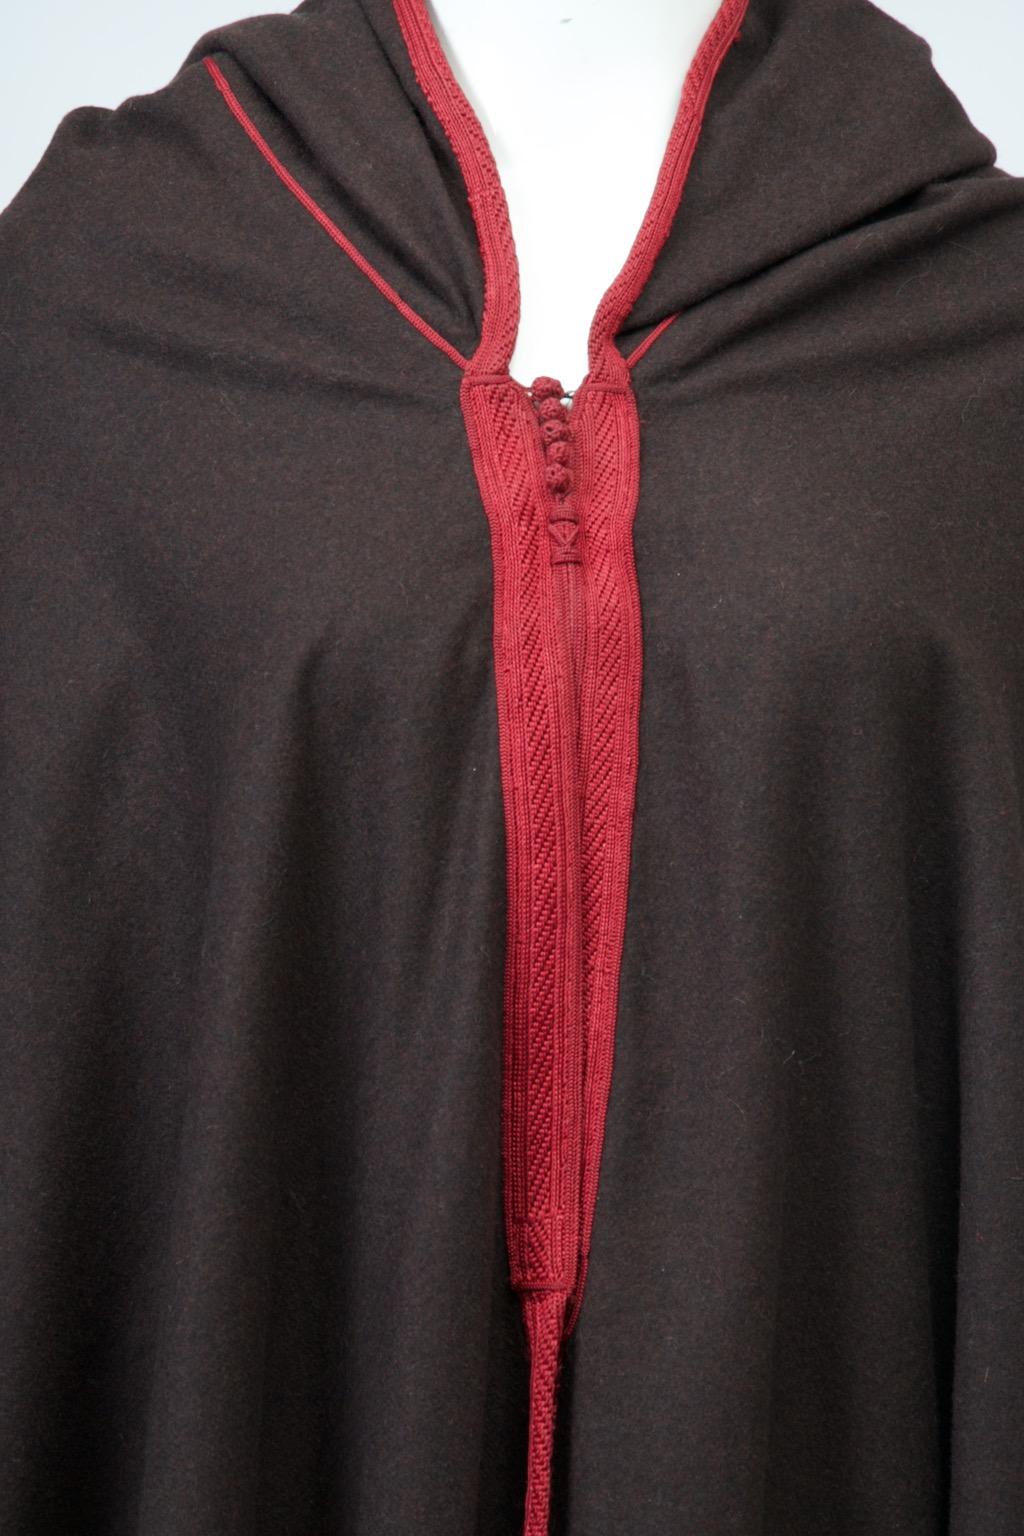 Yves Saint Laurent hard-to-find vintage 1979s cape from the designer’s Moroccan collection. Crafted of black wool, the simply cut long cape features a pointed hood and burgundy braided trim on all edges, a single row except for the wider area below